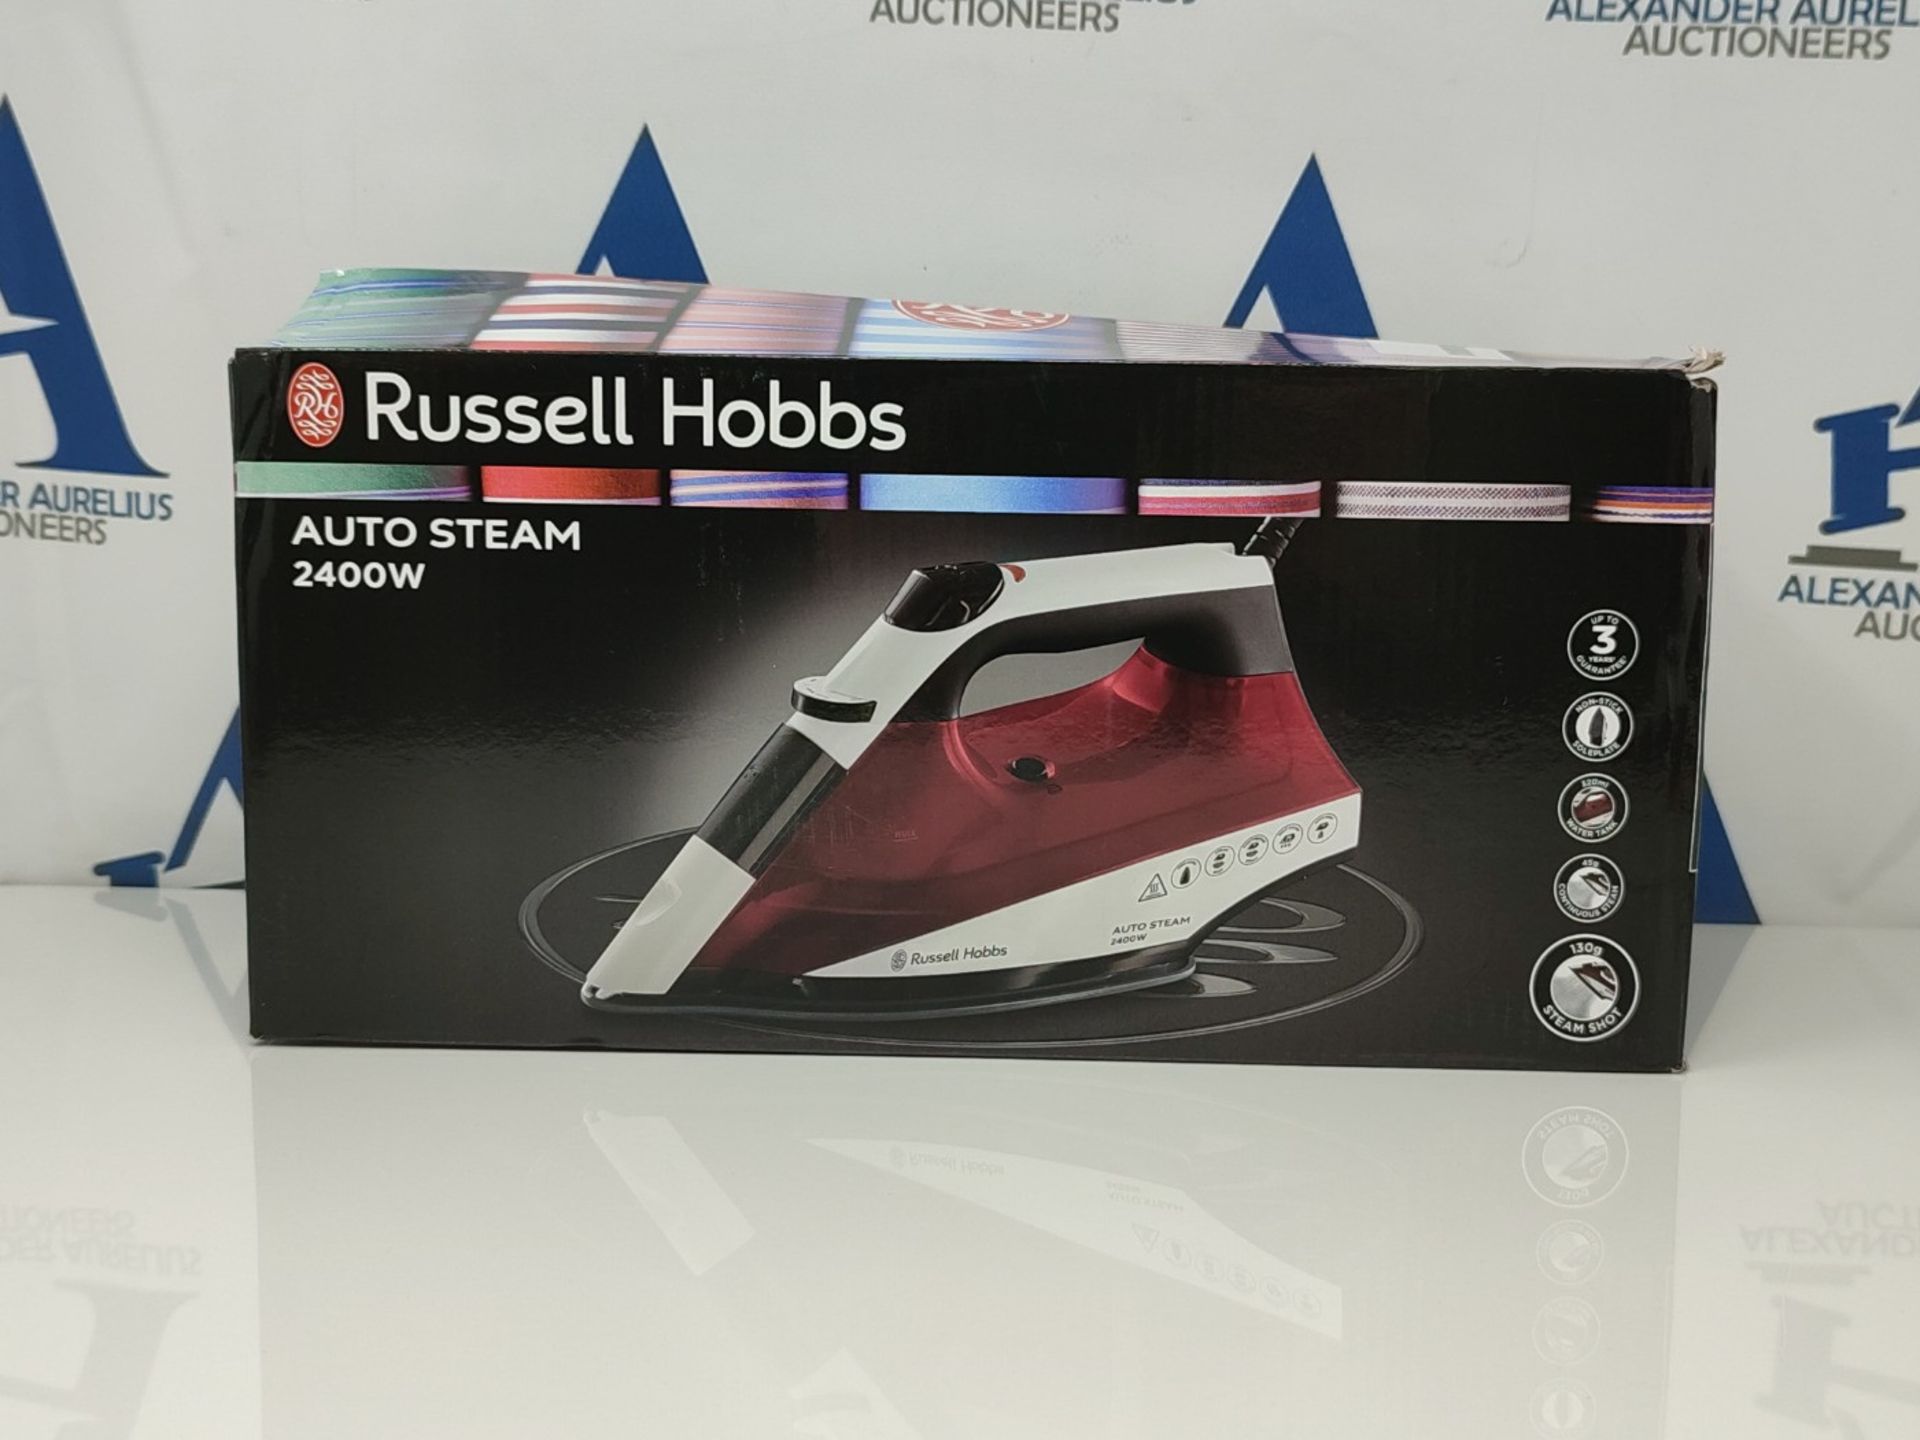 Russell Hobbs Auto Steam Pro Non-Stick Iron 22520, 2400 W, White and Red - Image 2 of 3